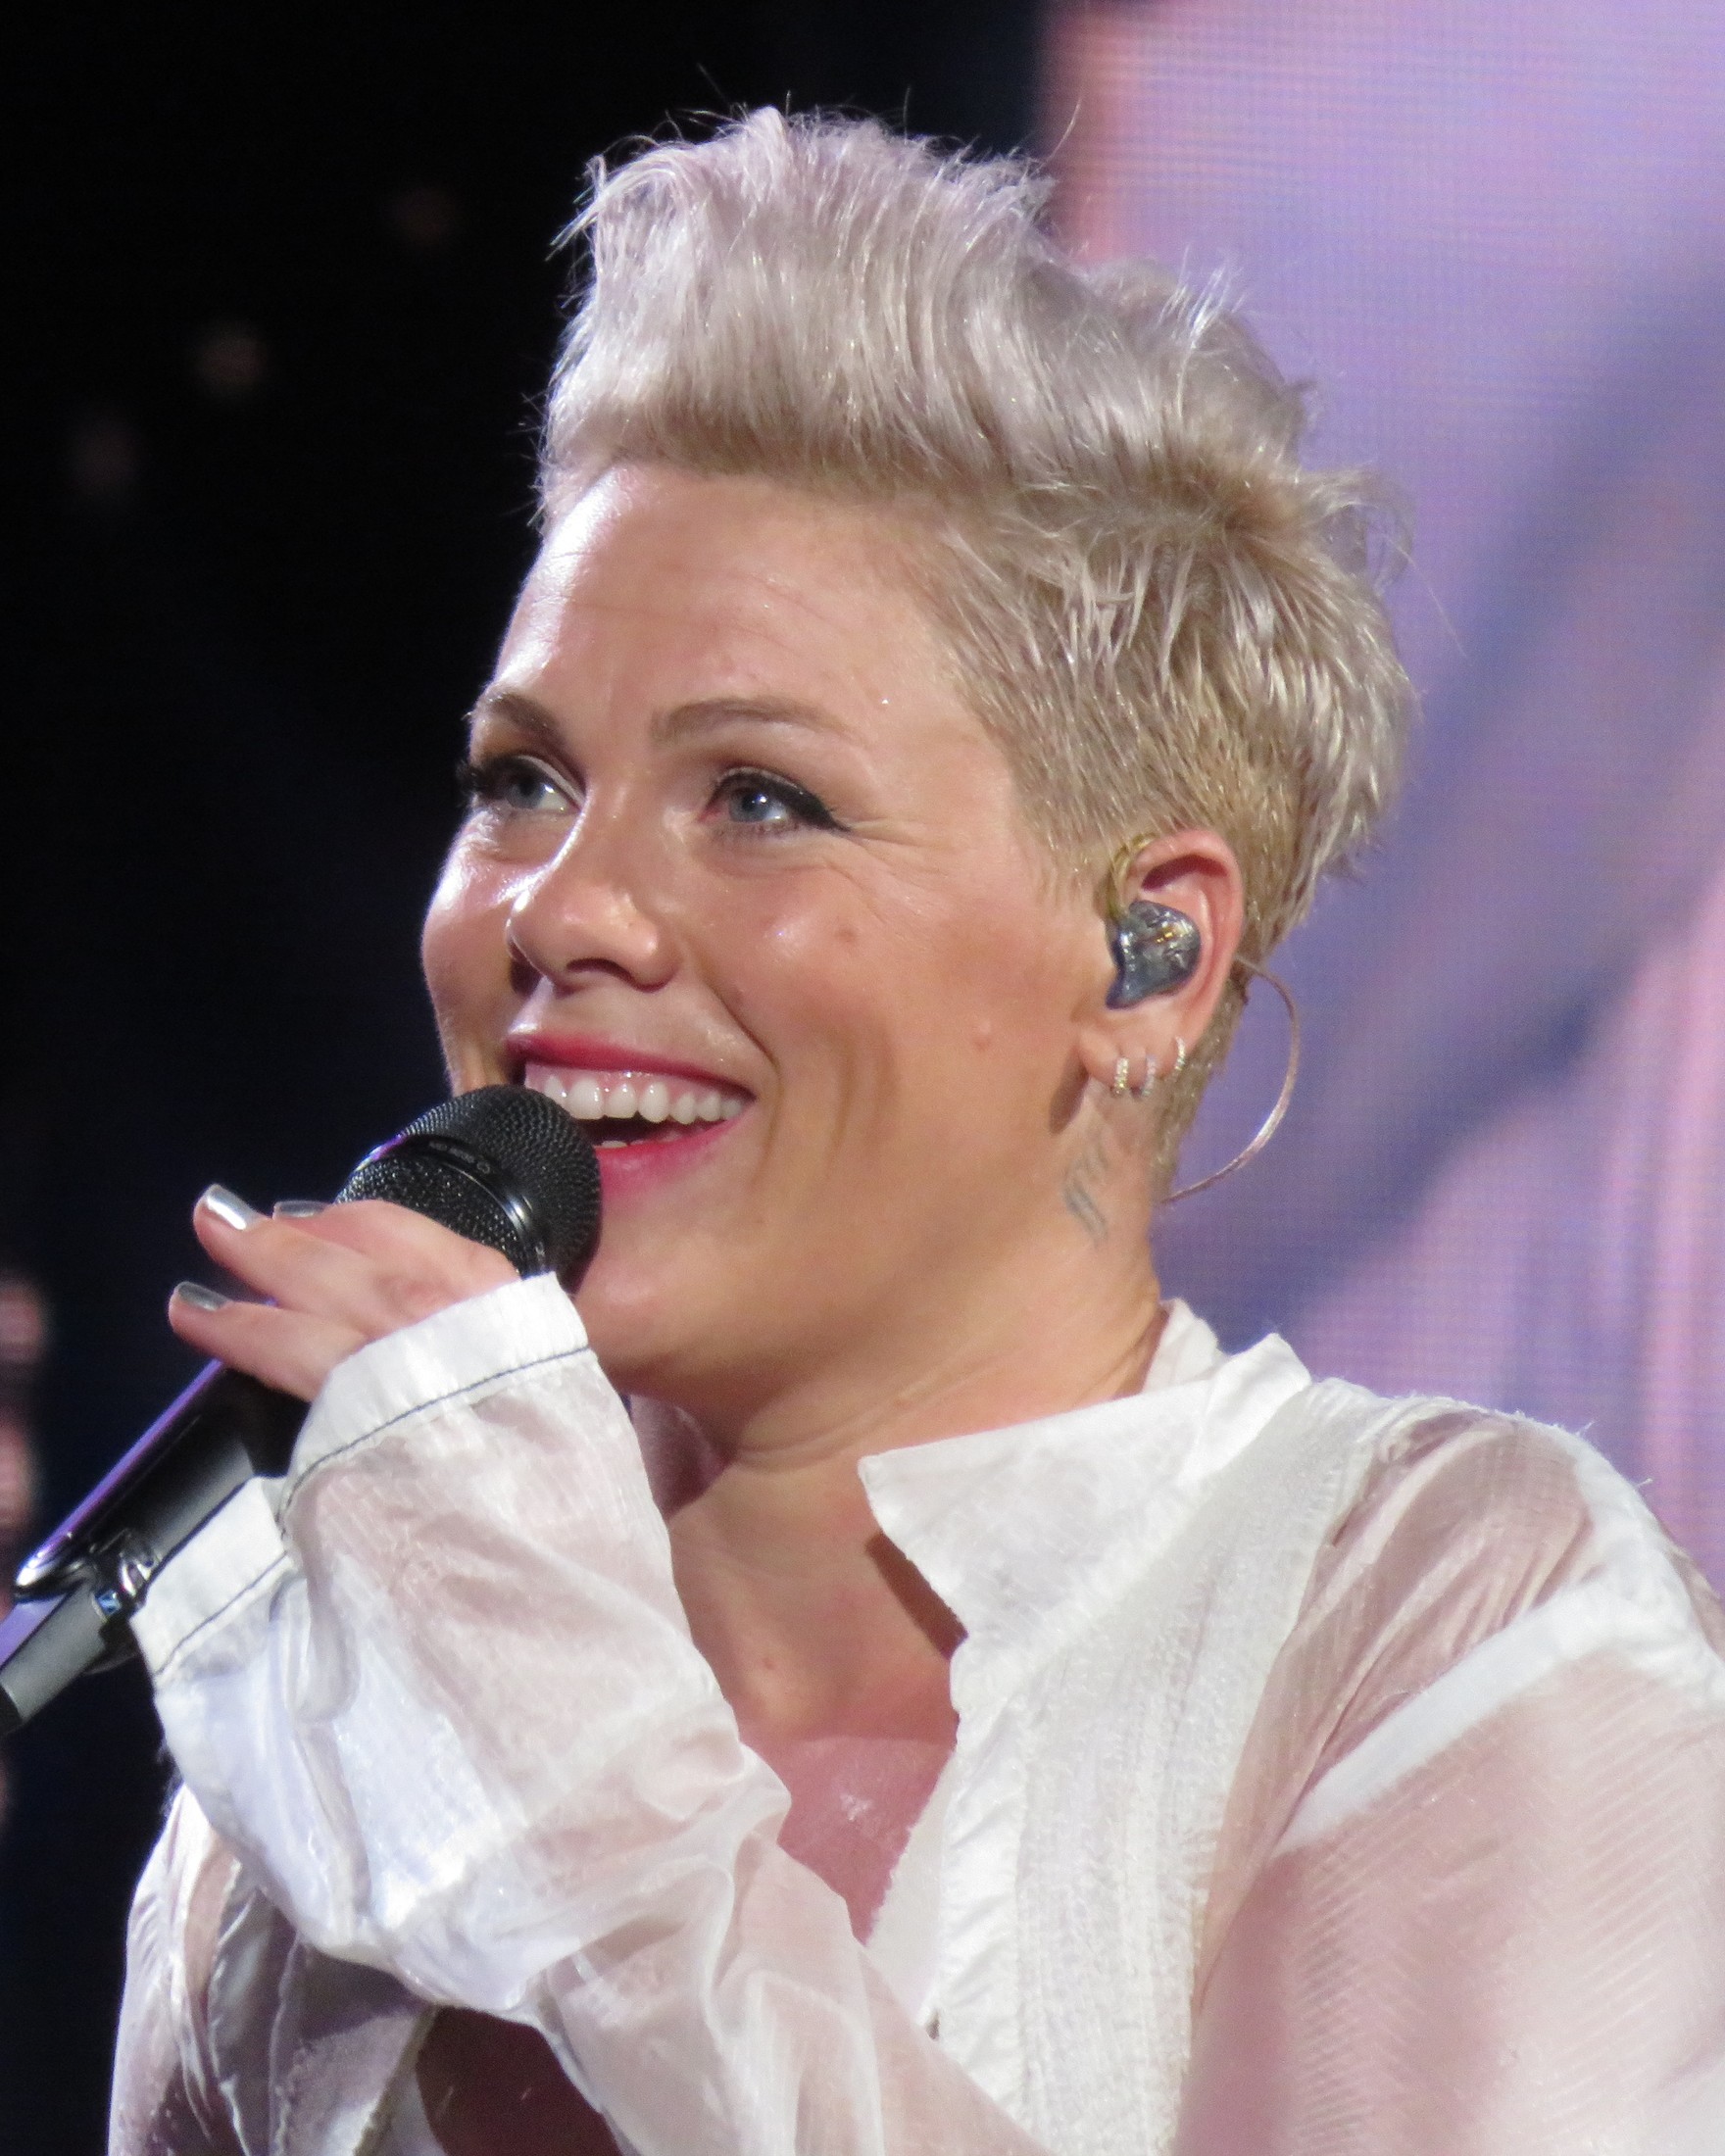 pink-claps-back-at-hateful-birthday-message-aimed-at-insulting-her